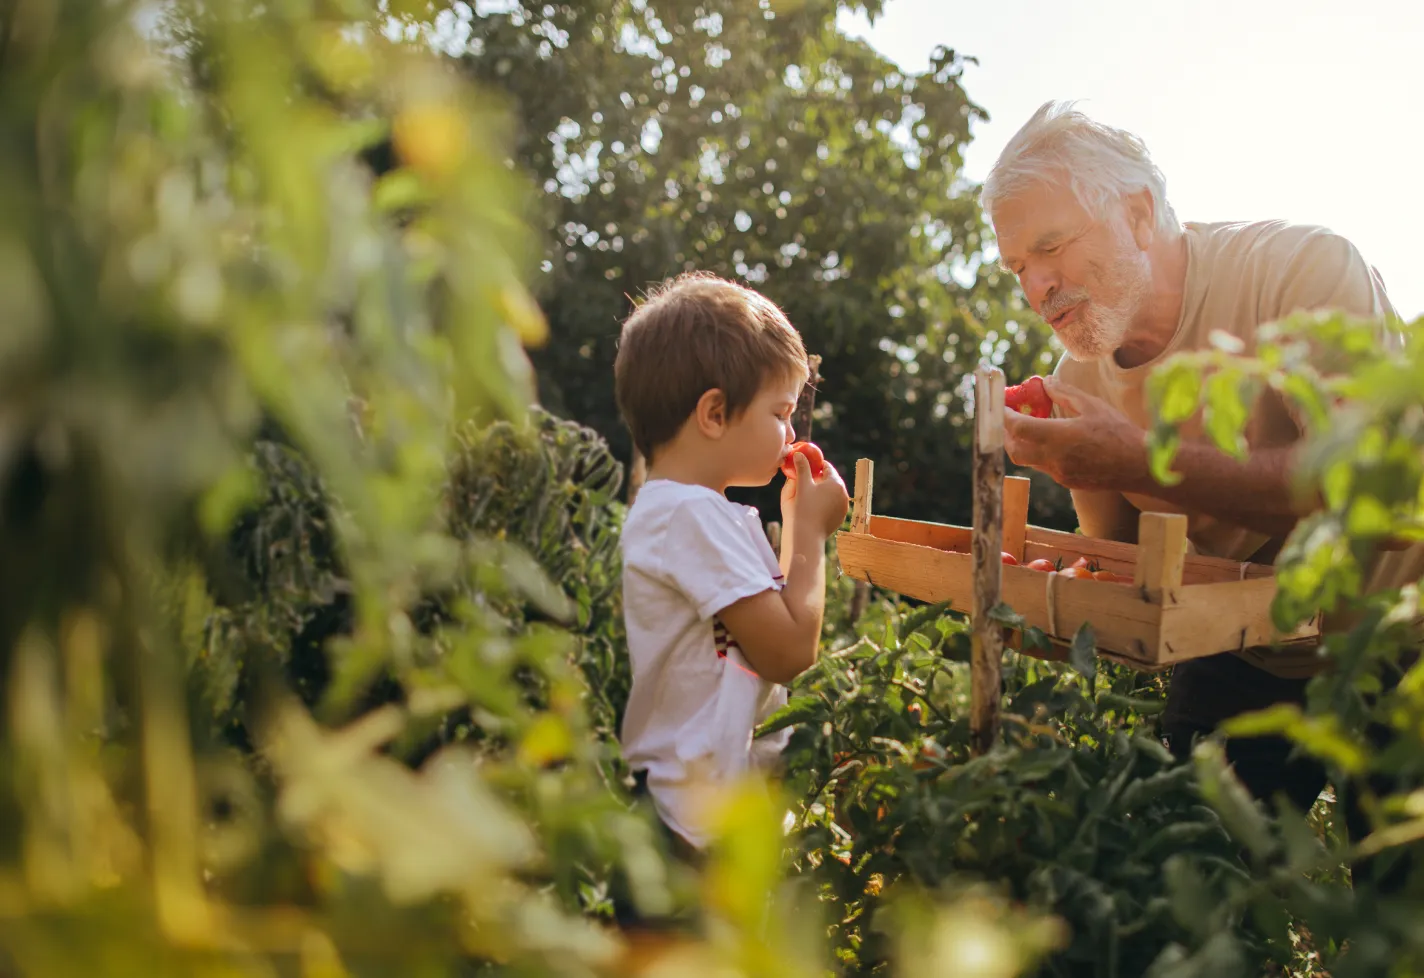 A young boy is eating tomatoes in the garden with his grandfather. 